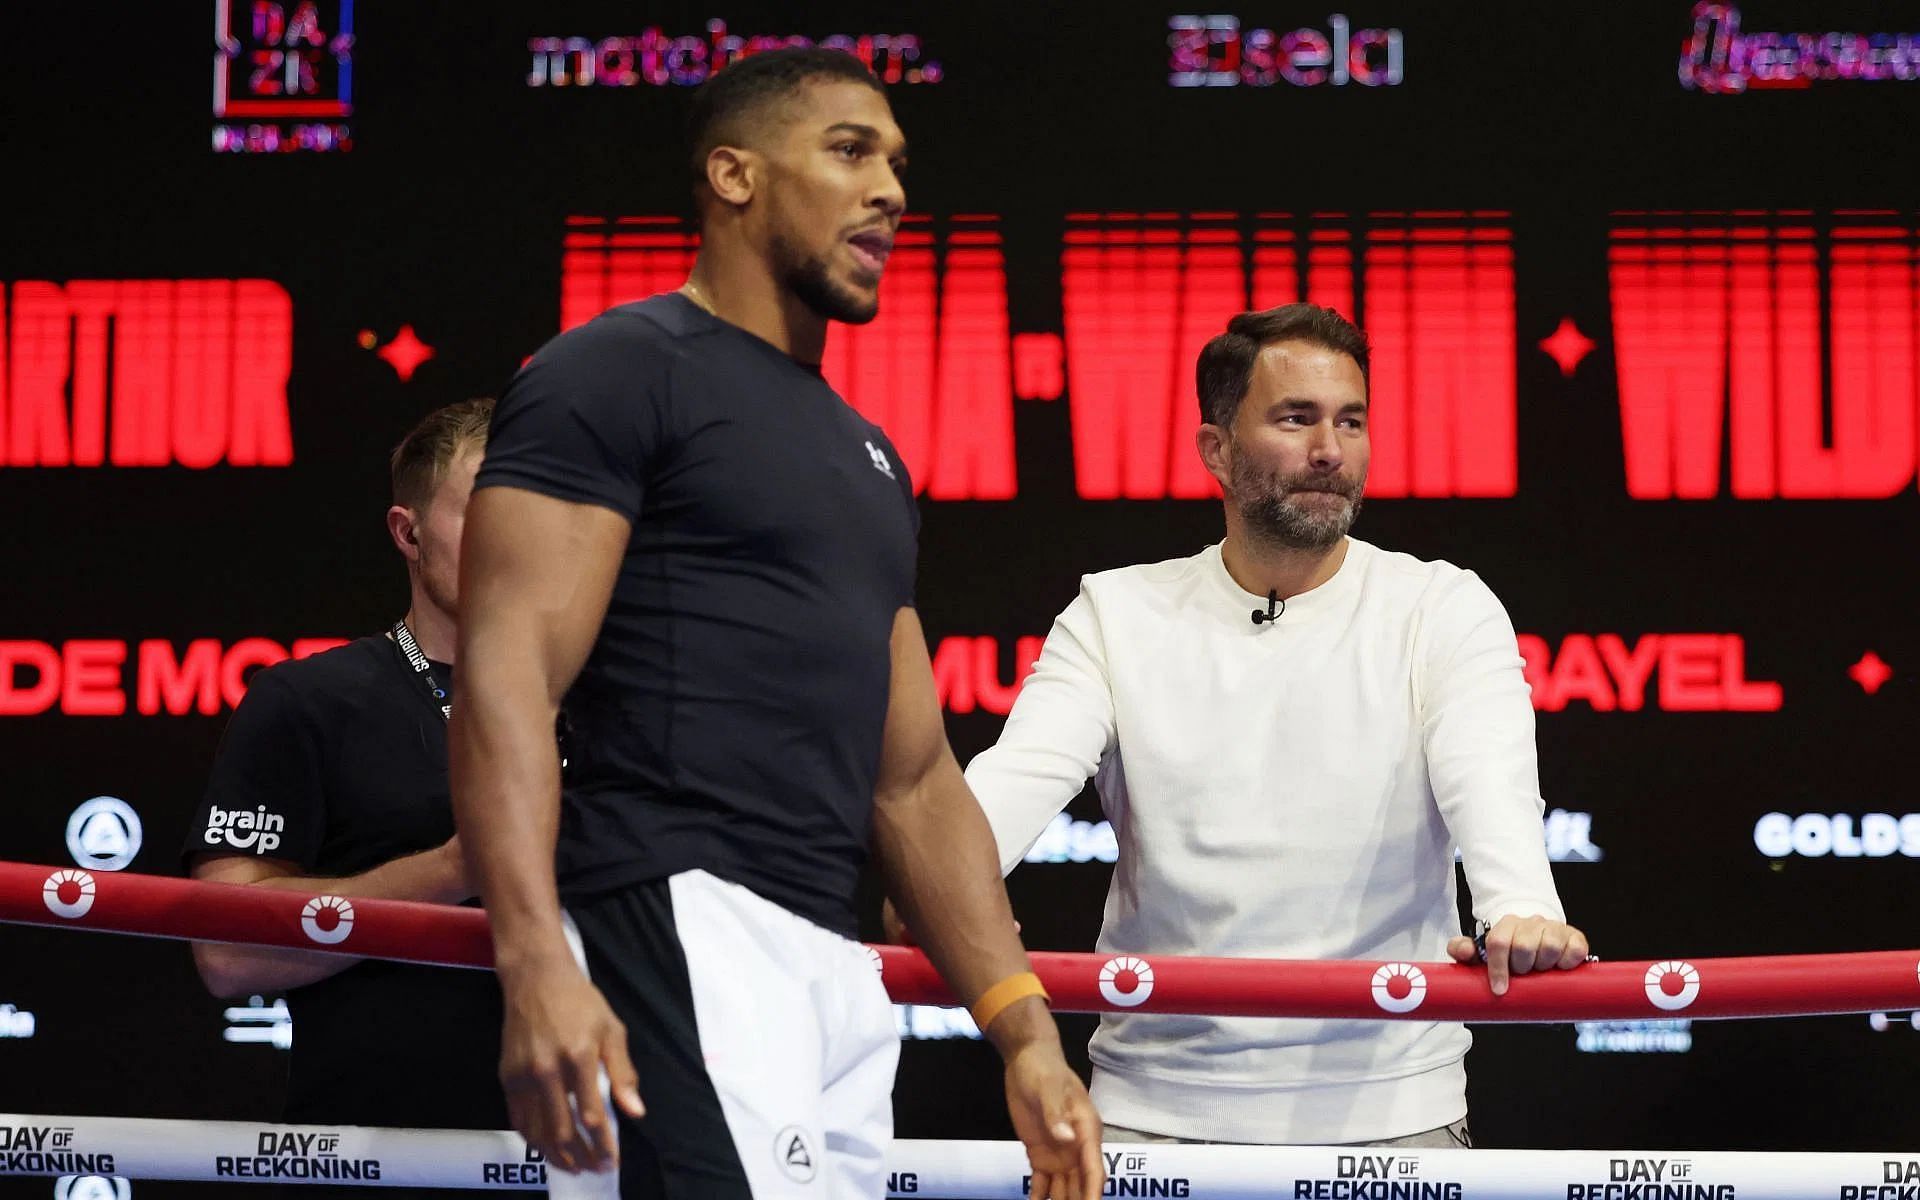 Anthony Joshua (left) has lots of options on the table, says his promoter, Eddie Hearn (right) [Image Courtesy: @GettyImages]